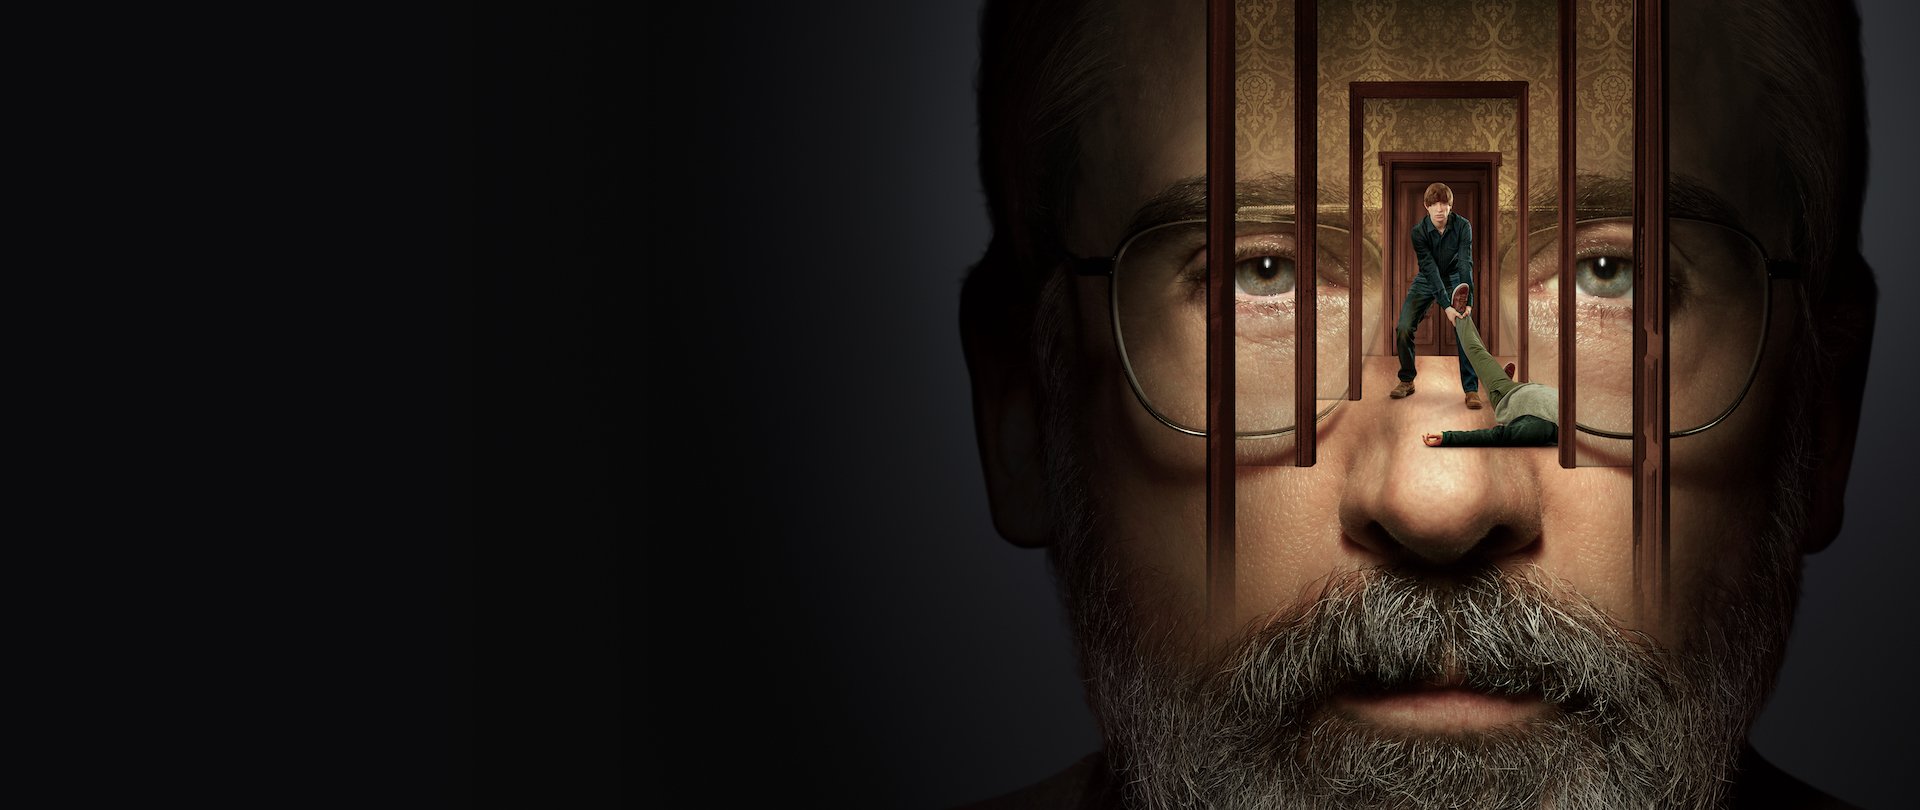 'The Patient' series poster from FX and Hulu featuring Steve Carell and Domhnall Gleeson